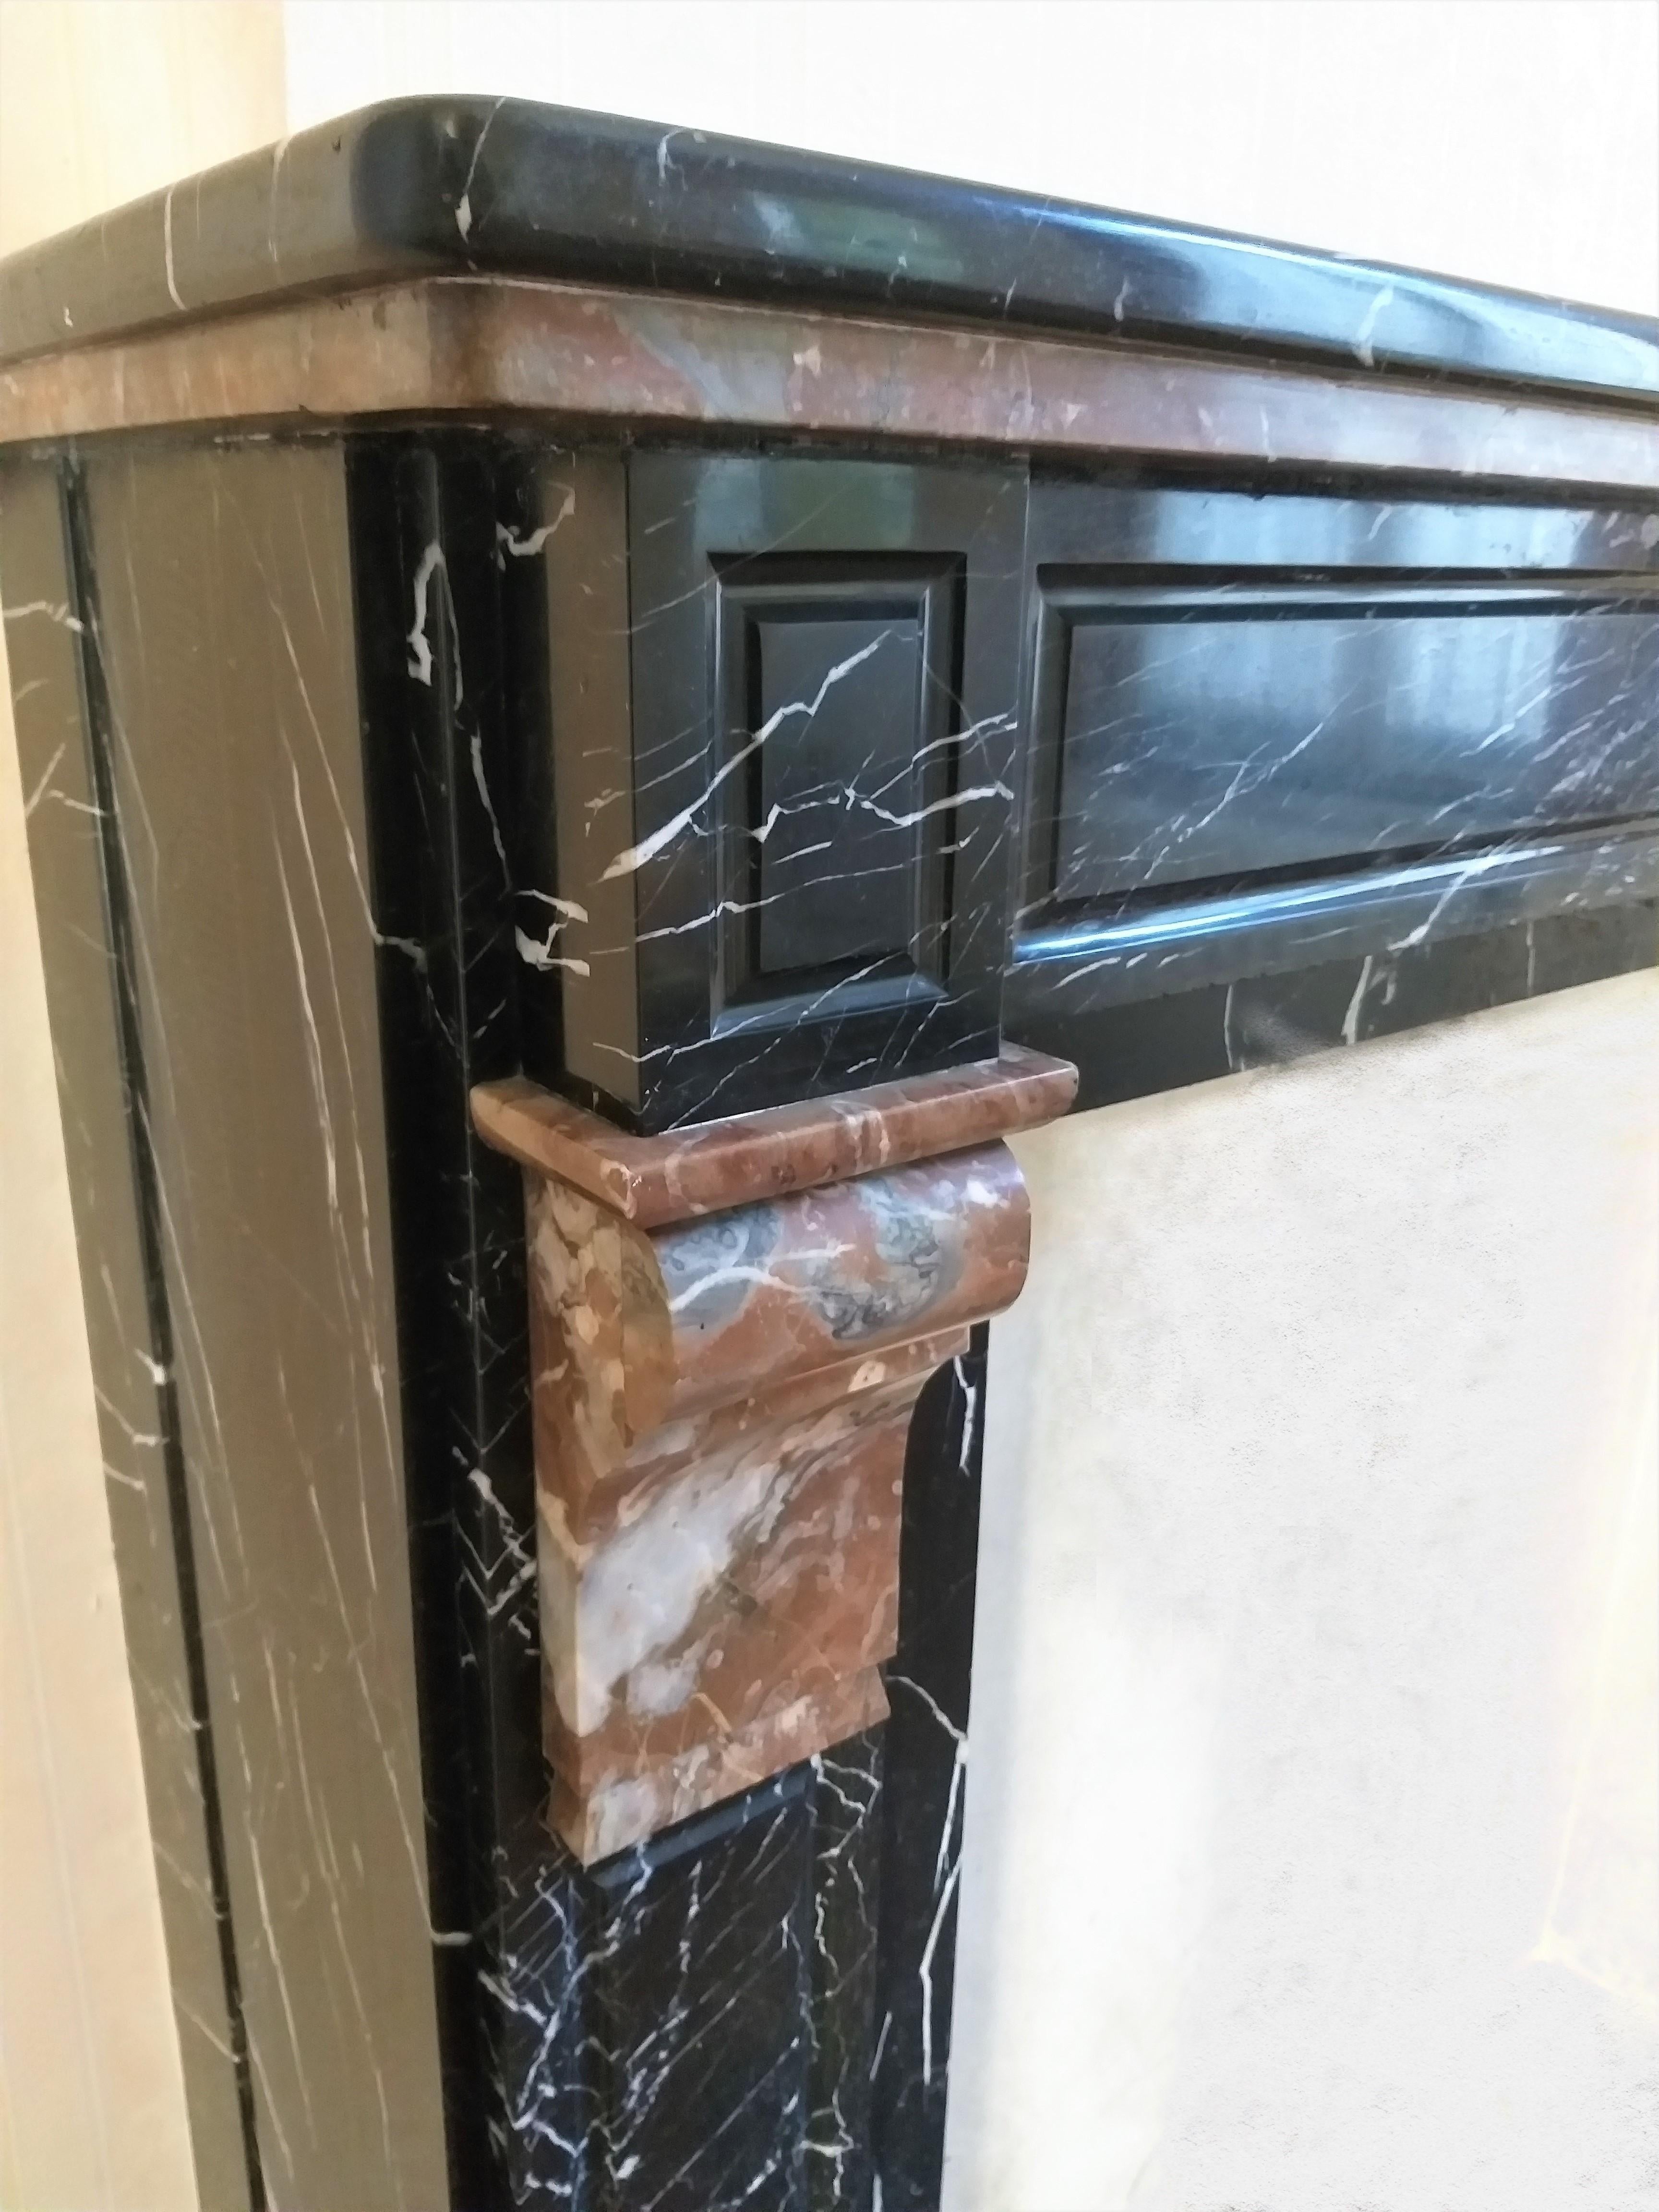 A simple Belgian fireplace from the late 19th century, made out of Nero Marquina and Rouge Royal marbles.
The double moulded shelf rest above a paneled frieze.
The white veins in this black marble brings relief and movement to this fireplace.
All